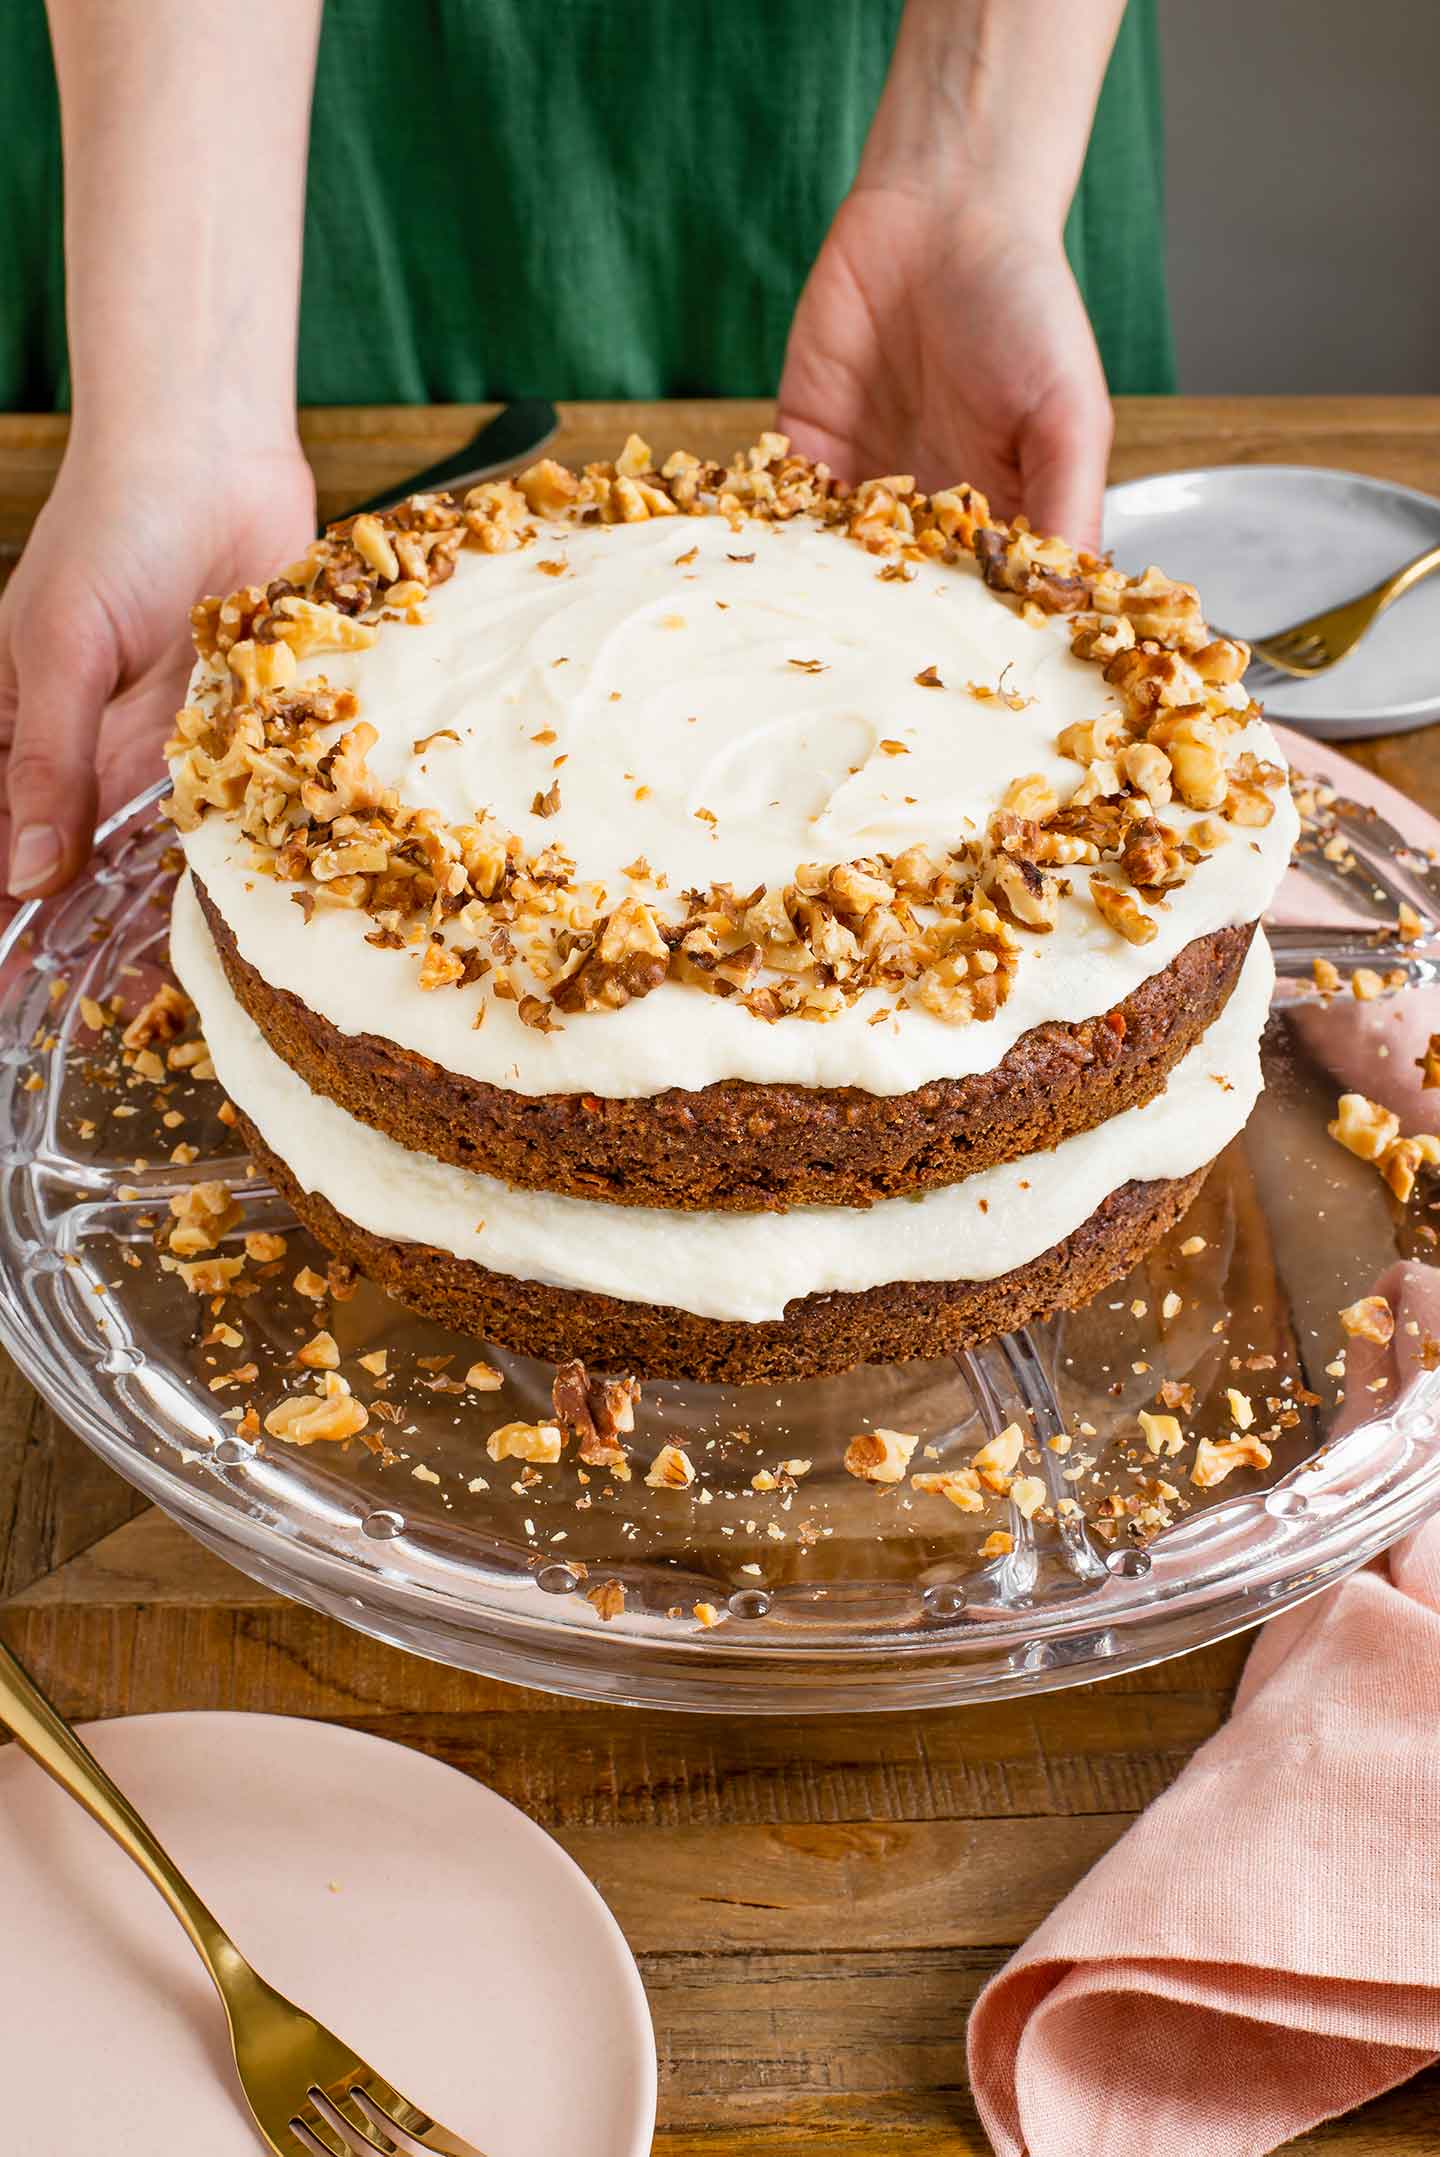 A two tier vegan carrot cake is presented on a cake stand. The sides of the cake are not iced but the centre and top is frosted with vegan cream cheese frosting and decorated with crushed toasted walnuts.